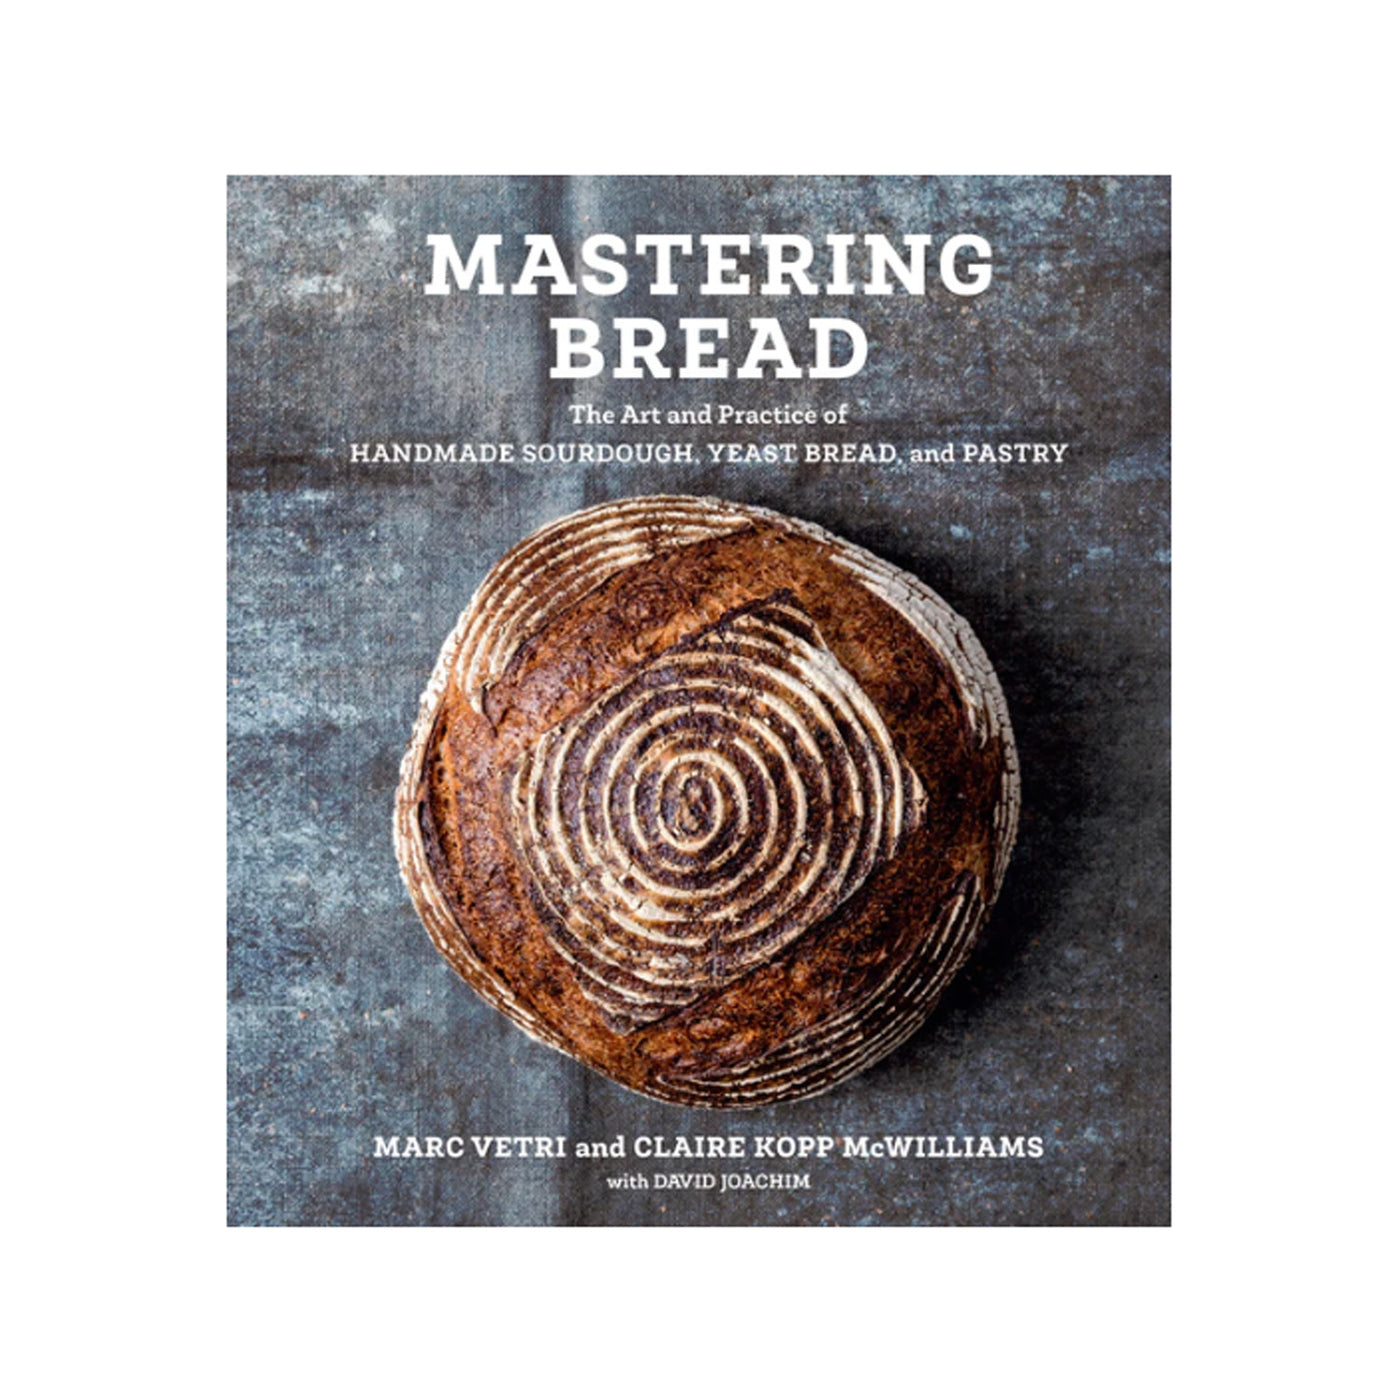 Book titled Mastering Bread